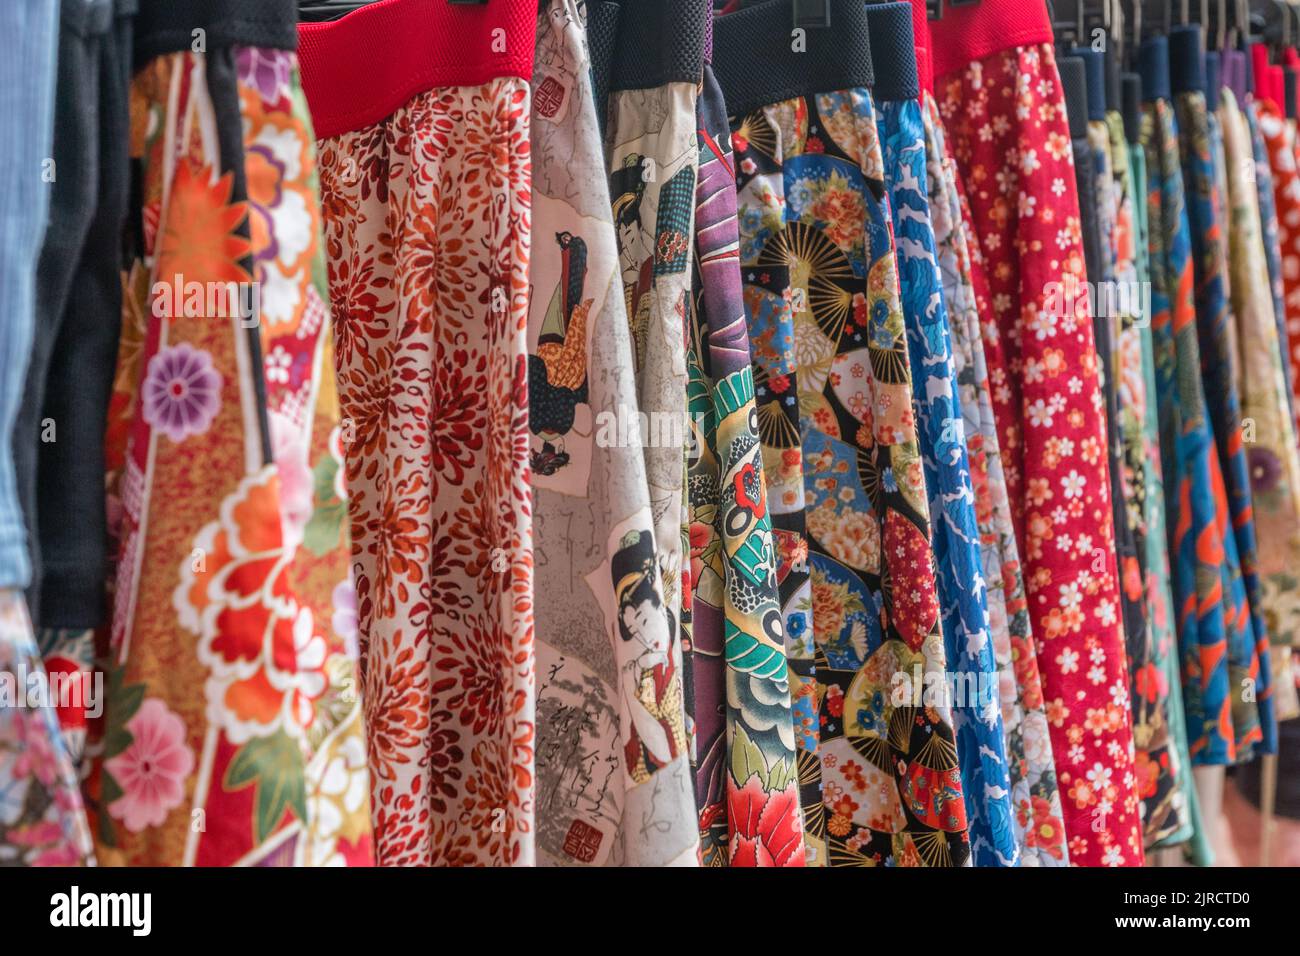 Row of colorful skirts in different fabrics for sale at outdoor market stall. Stock Photo